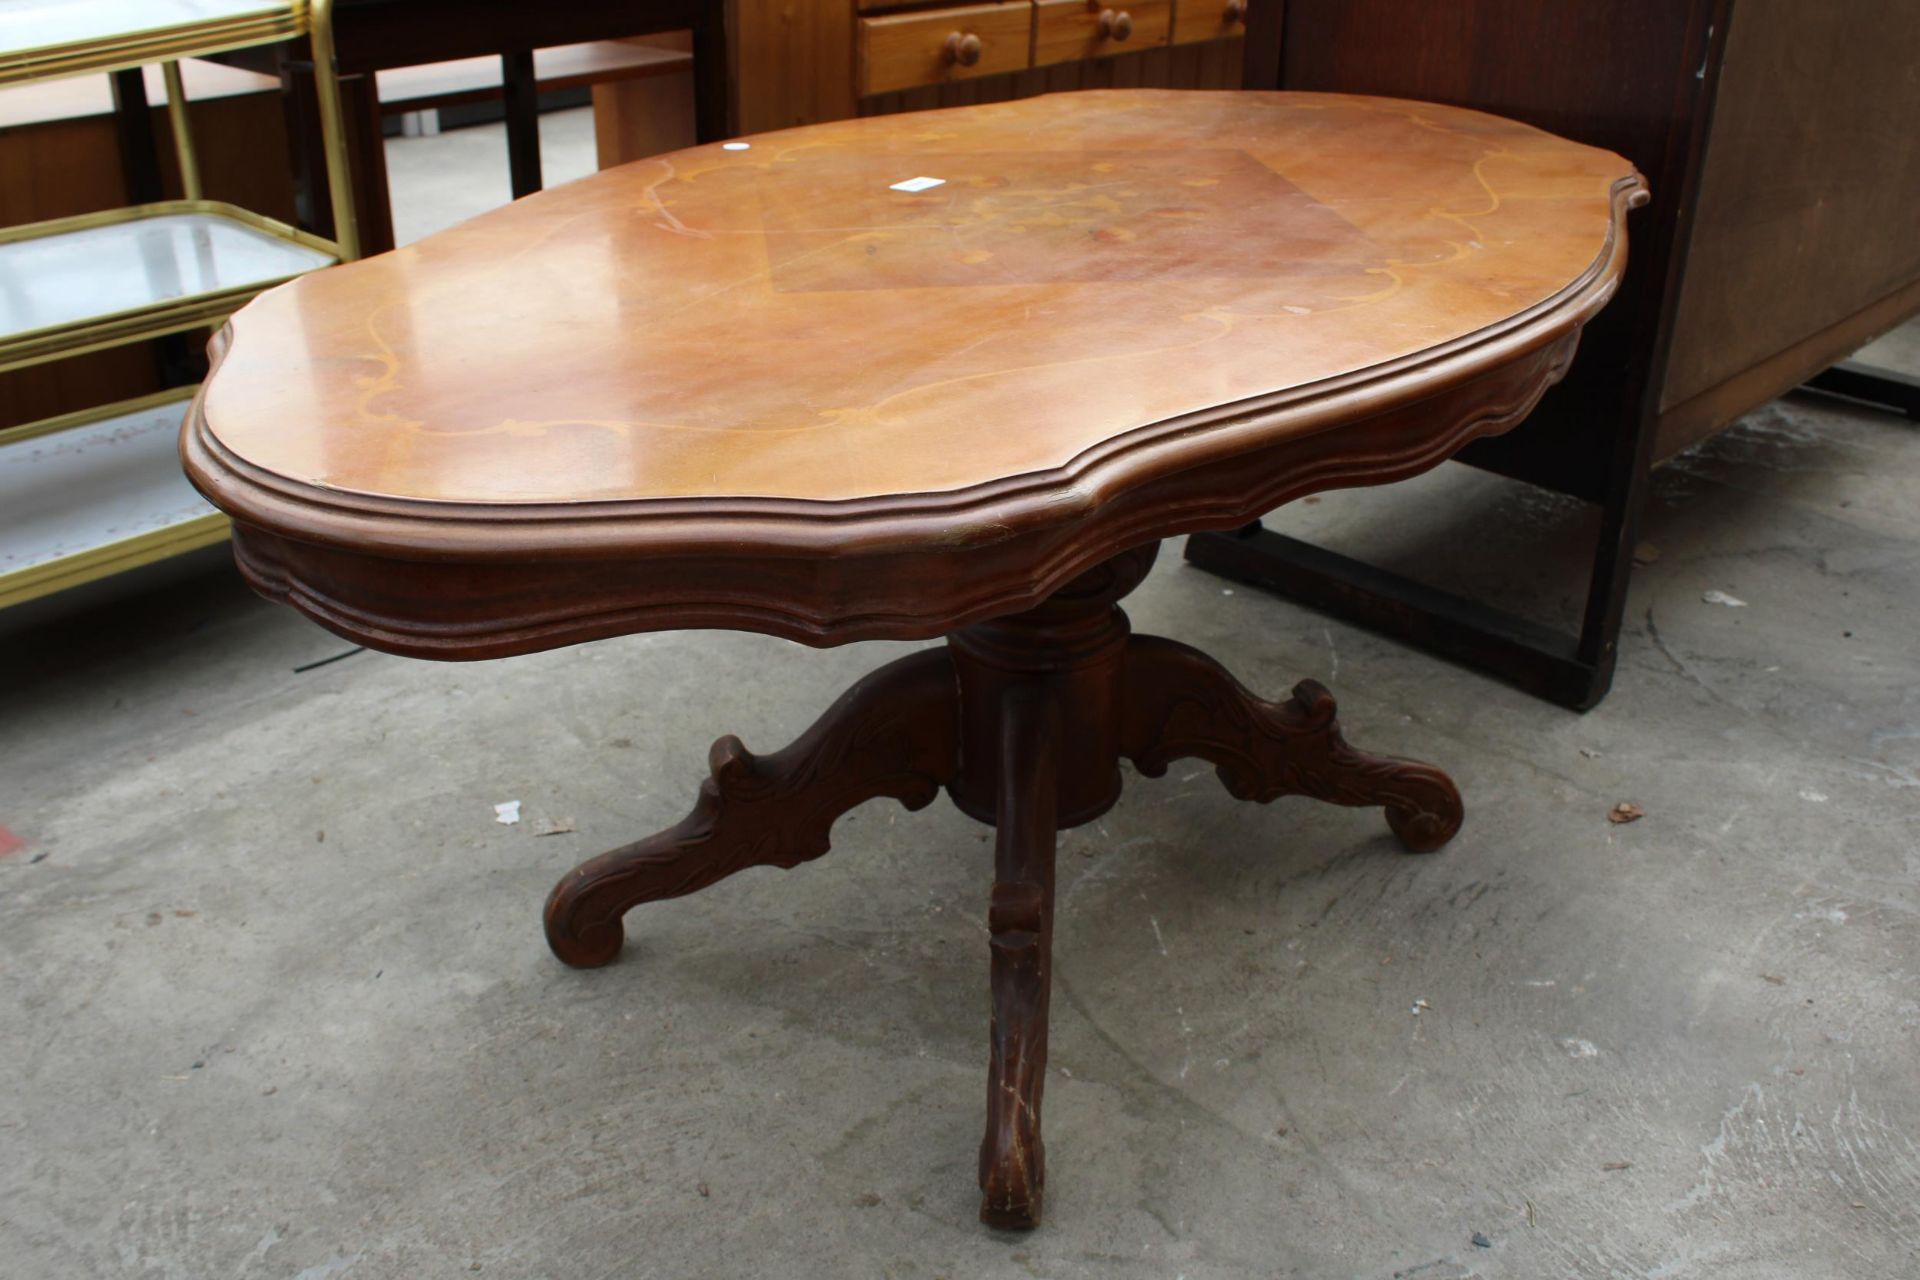 AN OVAL ITALIAN STYLE COFFEE TABLE ON A PEDESTAL BASE - Image 2 of 3